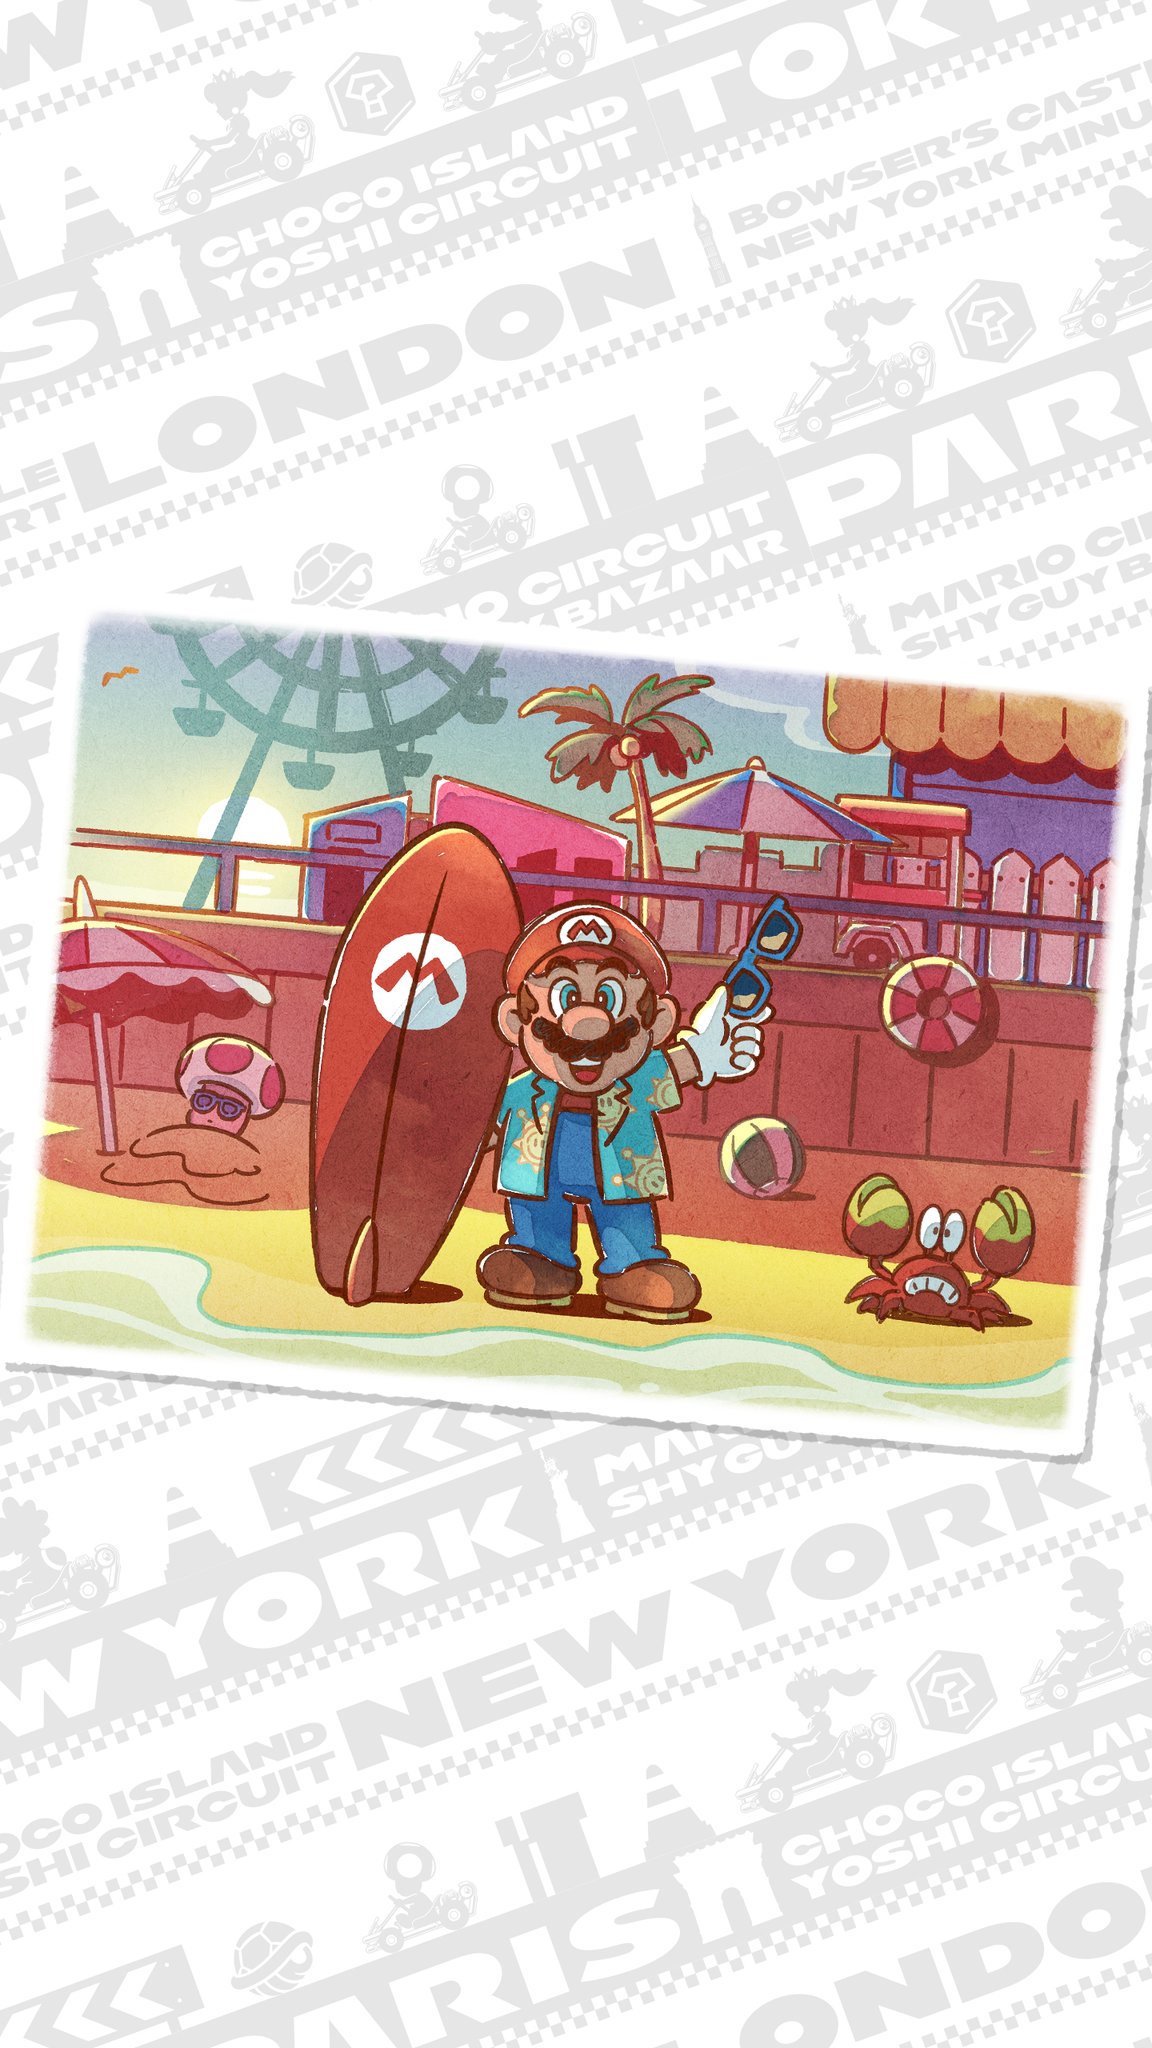 Mario Kart (Tour) News on X: Whenever a new city circuit is announced  there is always a new official artwork from the #MarioKartTour team. Which  is your favorite piece of art so